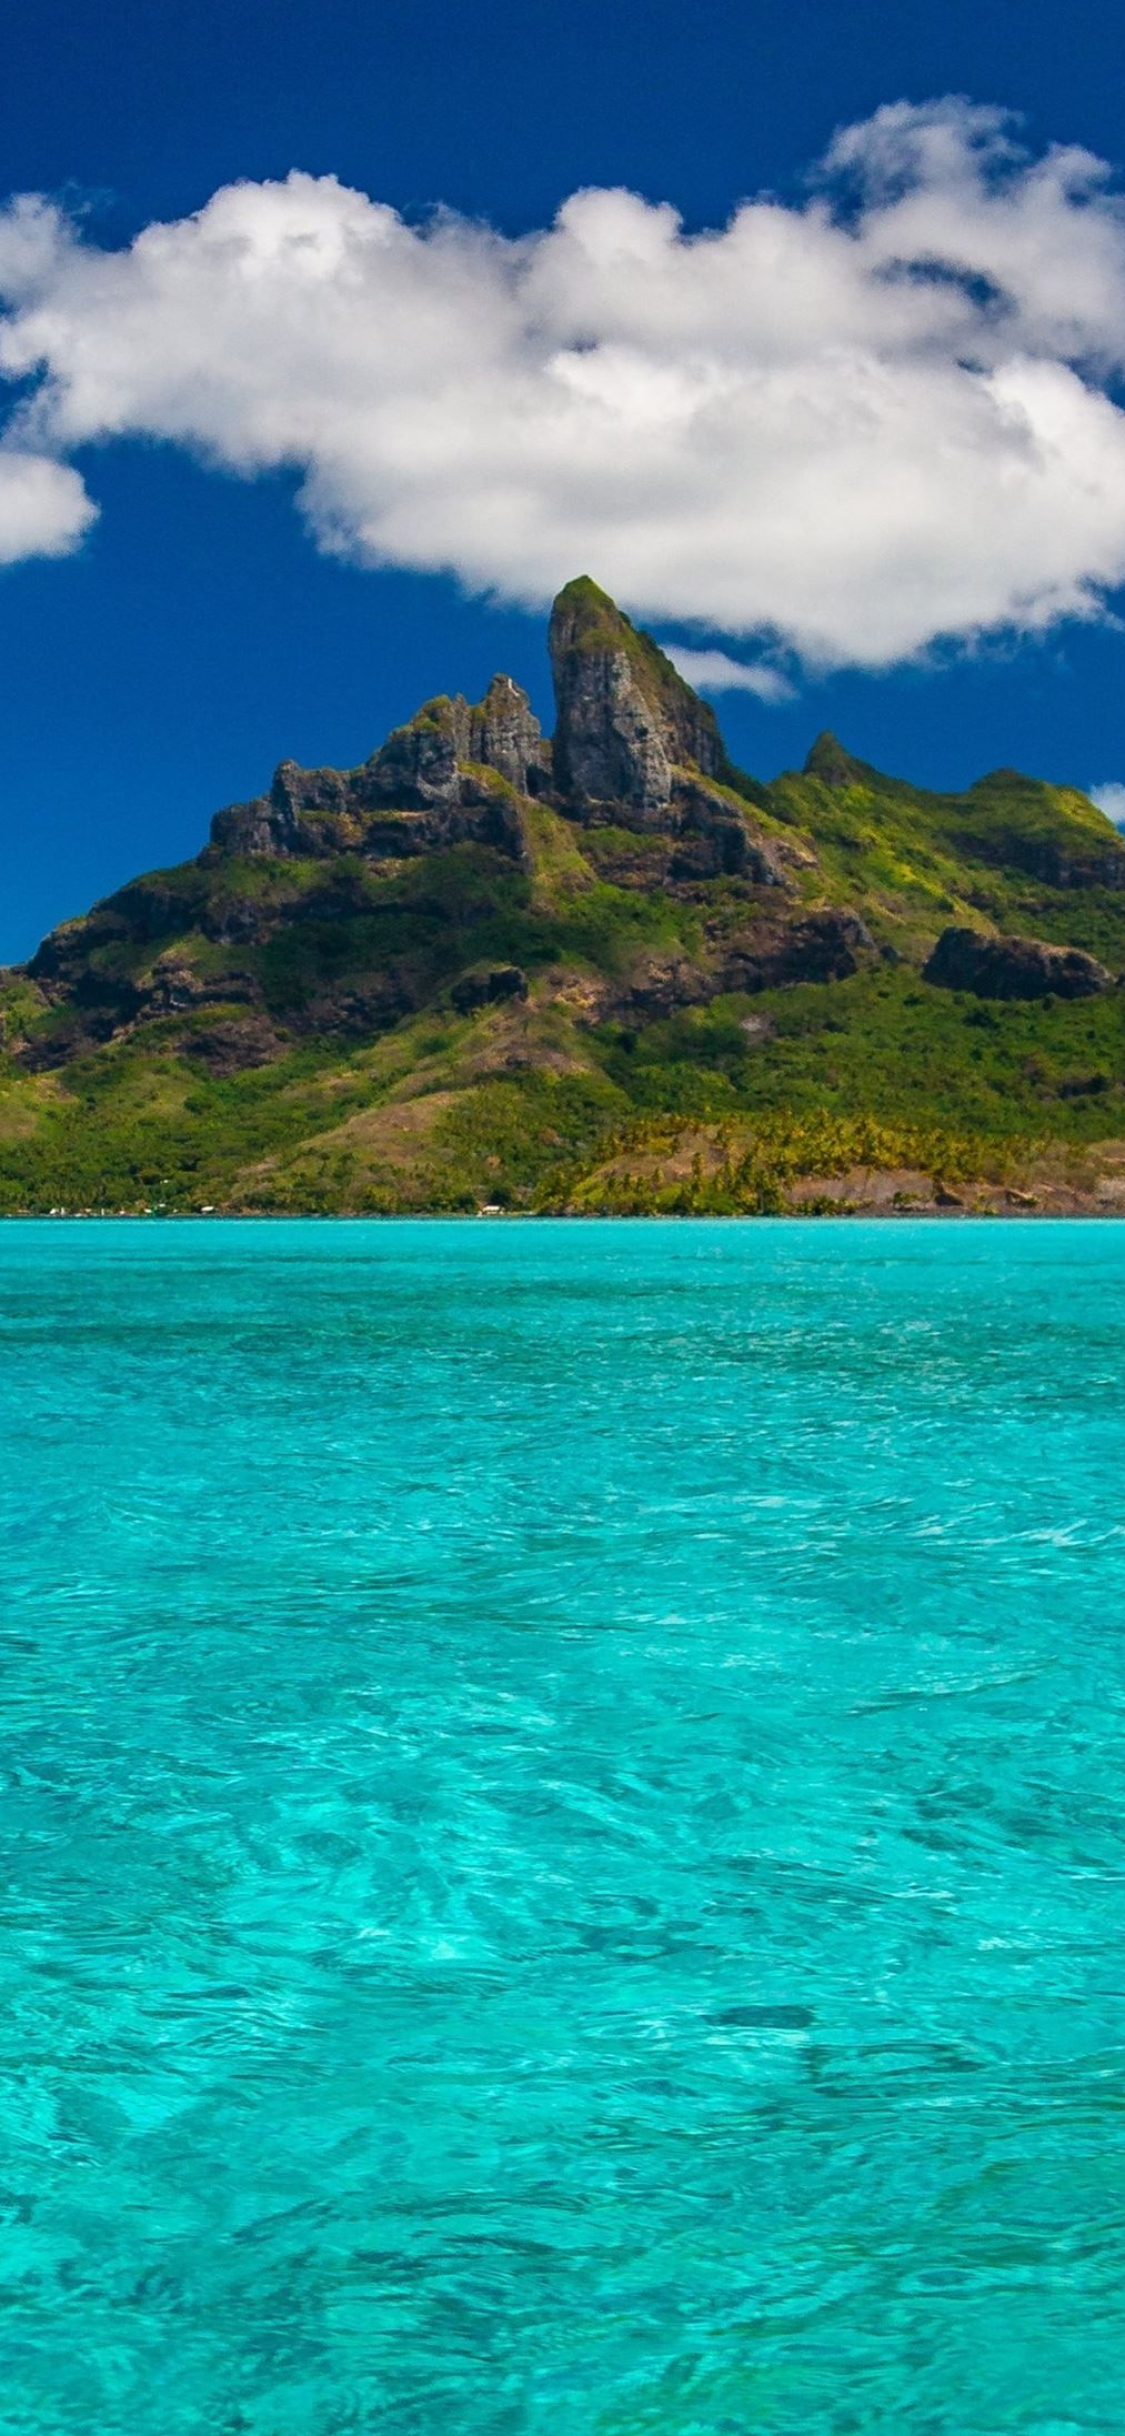 Bora Bora: Mount Otemanu, One of two peaks of an extinct volcano located at the center of the island, French Polynesia. 1130x2440 HD Wallpaper.